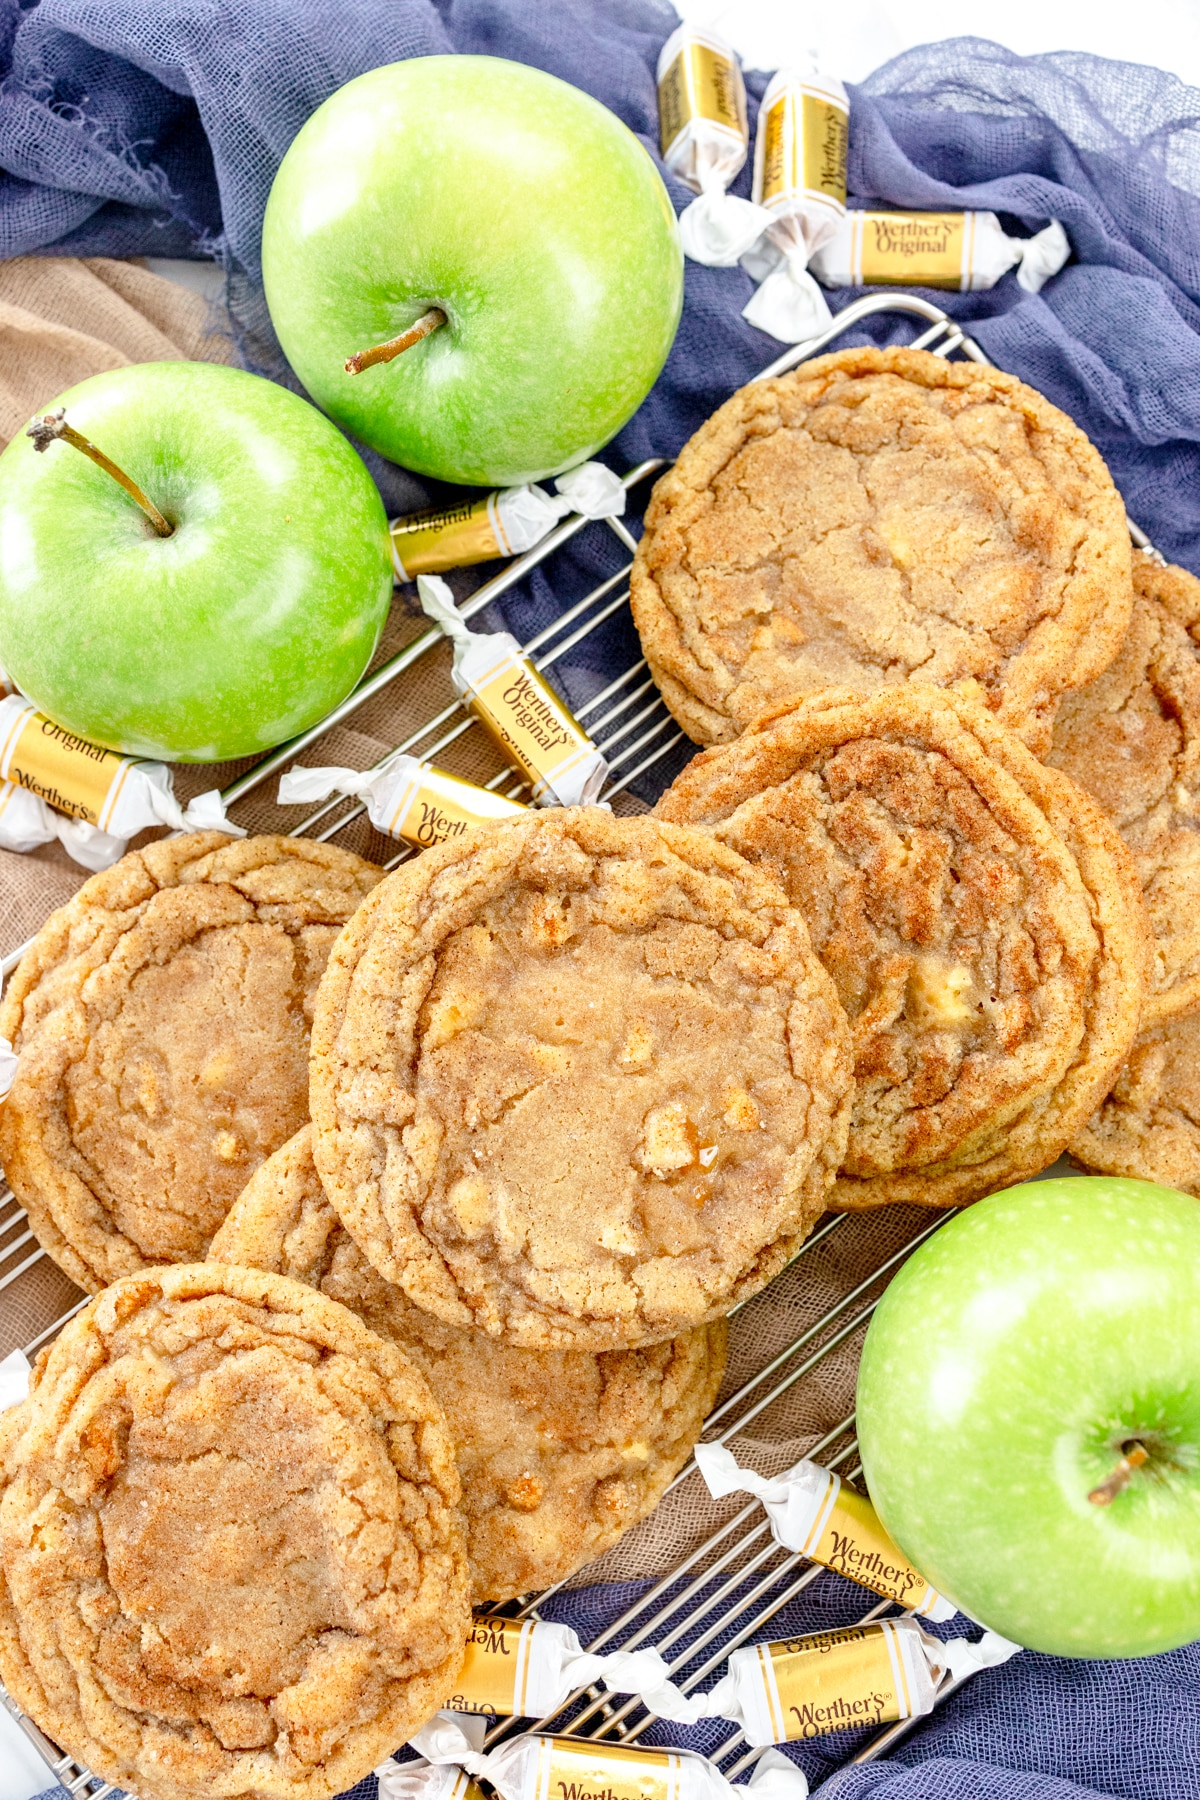 Top view of caramel apple snickerdoodle cookies surrounded by apples and Werther's Original caramels.